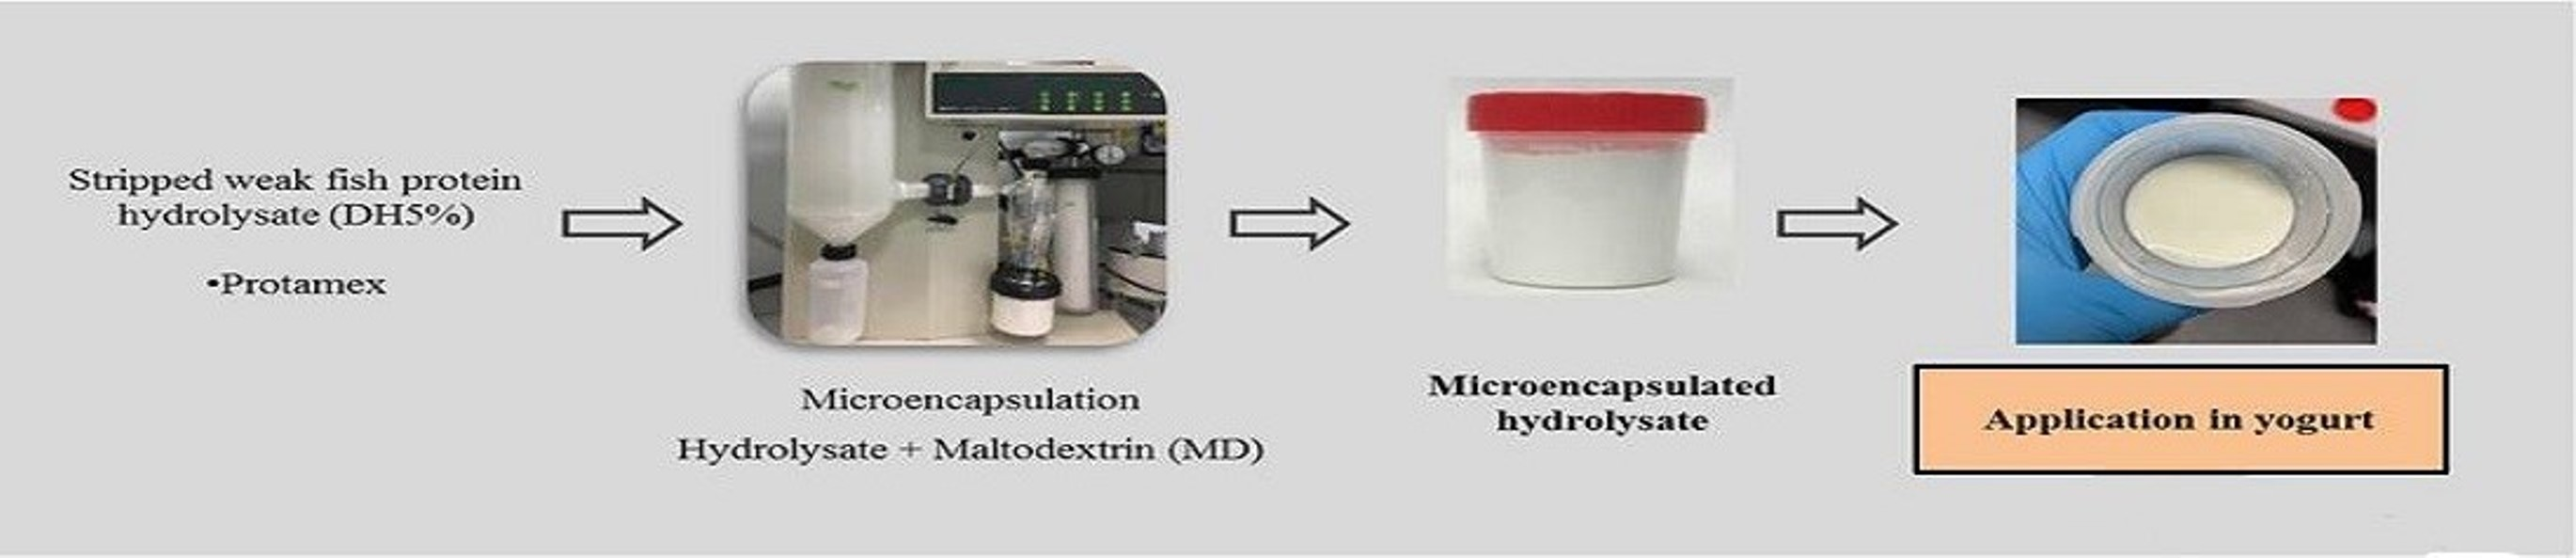 PDF) Functionalization of yogurts with Agaricus bisporus extracts